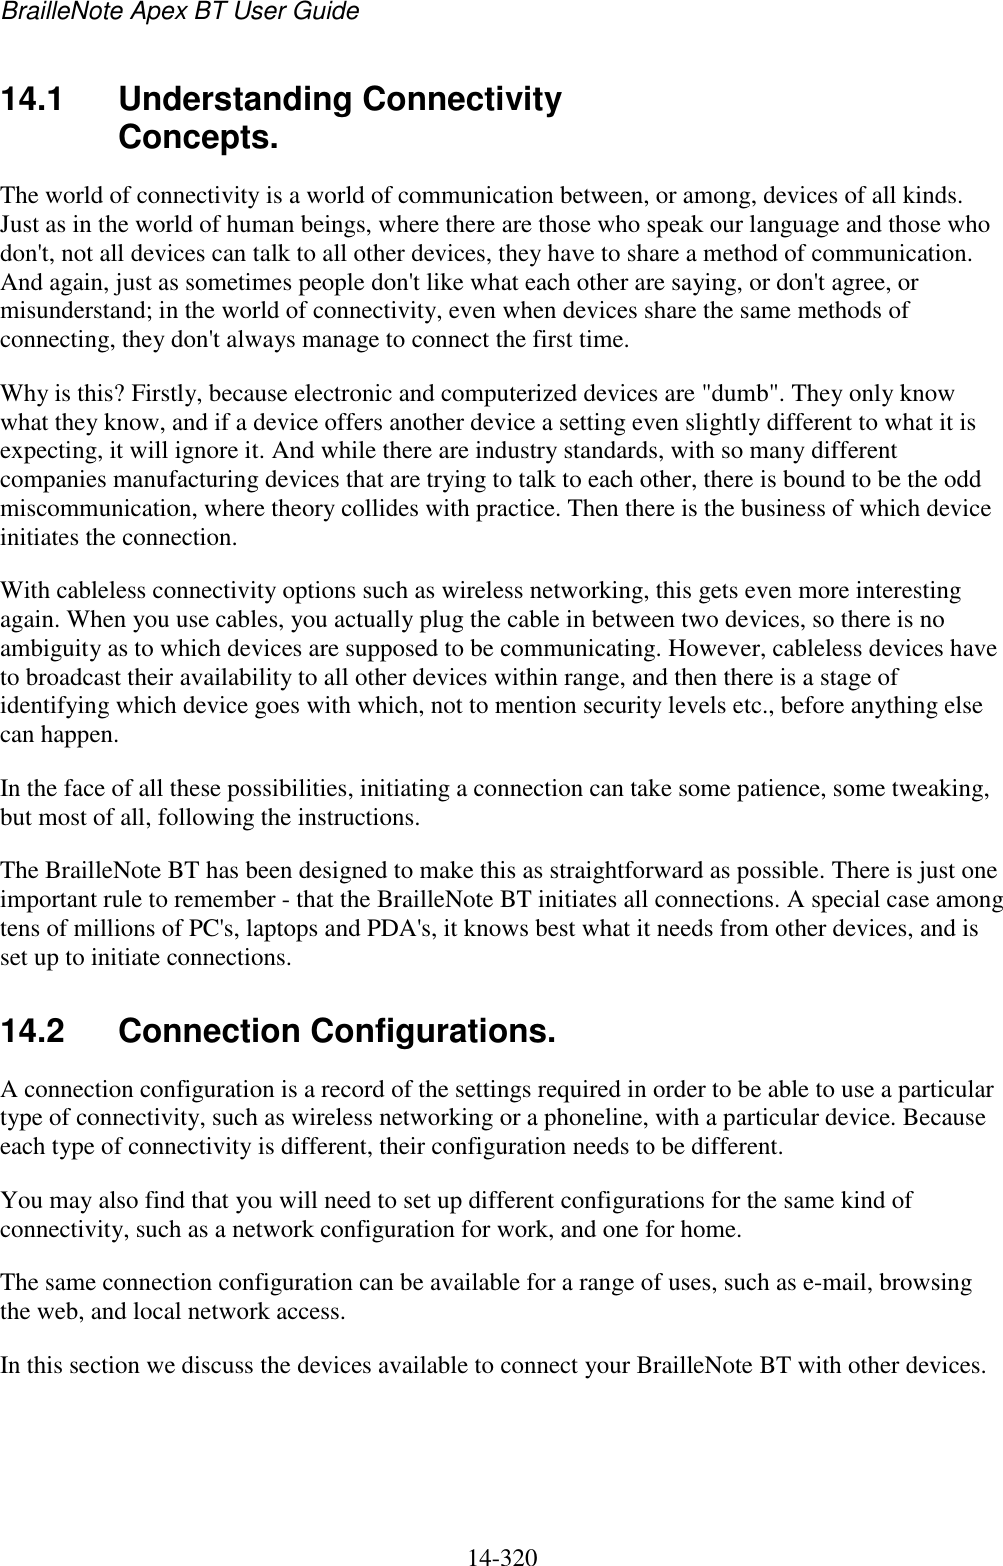 BrailleNote Apex BT User Guide   14-320   14.1  Understanding Connectivity Concepts. The world of connectivity is a world of communication between, or among, devices of all kinds. Just as in the world of human beings, where there are those who speak our language and those who don&apos;t, not all devices can talk to all other devices, they have to share a method of communication. And again, just as sometimes people don&apos;t like what each other are saying, or don&apos;t agree, or misunderstand; in the world of connectivity, even when devices share the same methods of connecting, they don&apos;t always manage to connect the first time. Why is this? Firstly, because electronic and computerized devices are &quot;dumb&quot;. They only know what they know, and if a device offers another device a setting even slightly different to what it is expecting, it will ignore it. And while there are industry standards, with so many different companies manufacturing devices that are trying to talk to each other, there is bound to be the odd miscommunication, where theory collides with practice. Then there is the business of which device initiates the connection. With cableless connectivity options such as wireless networking, this gets even more interesting again. When you use cables, you actually plug the cable in between two devices, so there is no ambiguity as to which devices are supposed to be communicating. However, cableless devices have to broadcast their availability to all other devices within range, and then there is a stage of identifying which device goes with which, not to mention security levels etc., before anything else can happen. In the face of all these possibilities, initiating a connection can take some patience, some tweaking, but most of all, following the instructions. The BrailleNote BT has been designed to make this as straightforward as possible. There is just one important rule to remember - that the BrailleNote BT initiates all connections. A special case among tens of millions of PC&apos;s, laptops and PDA&apos;s, it knows best what it needs from other devices, and is set up to initiate connections.  14.2  Connection Configurations. A connection configuration is a record of the settings required in order to be able to use a particular type of connectivity, such as wireless networking or a phoneline, with a particular device. Because each type of connectivity is different, their configuration needs to be different. You may also find that you will need to set up different configurations for the same kind of connectivity, such as a network configuration for work, and one for home. The same connection configuration can be available for a range of uses, such as e-mail, browsing the web, and local network access. In this section we discuss the devices available to connect your BrailleNote BT with other devices.   